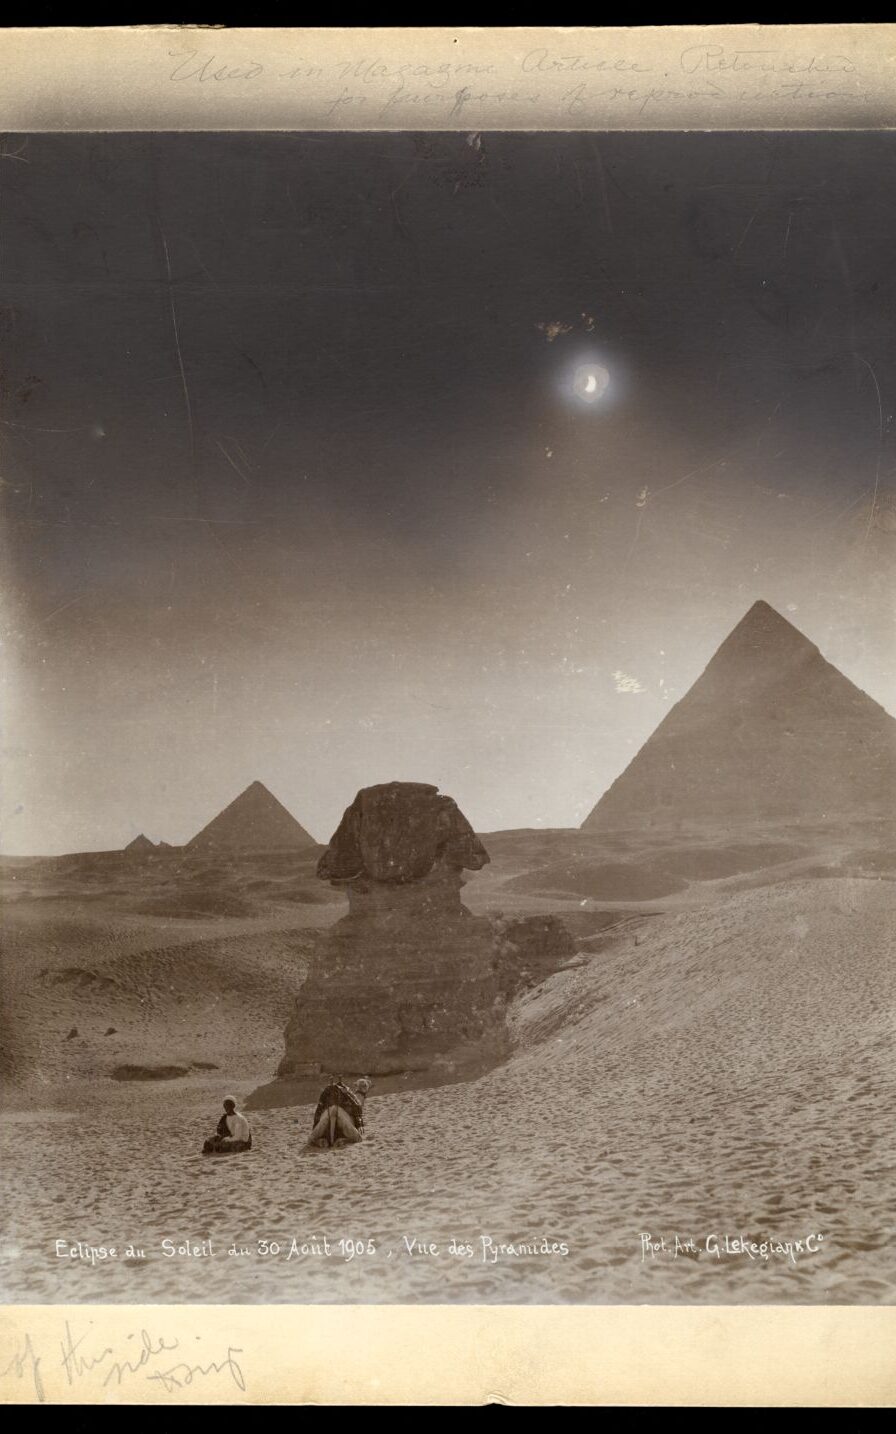 Sandy landscape with Egyption pyramids visible in the background. A woman sits on the Sand as the Moon crosses the Sun.